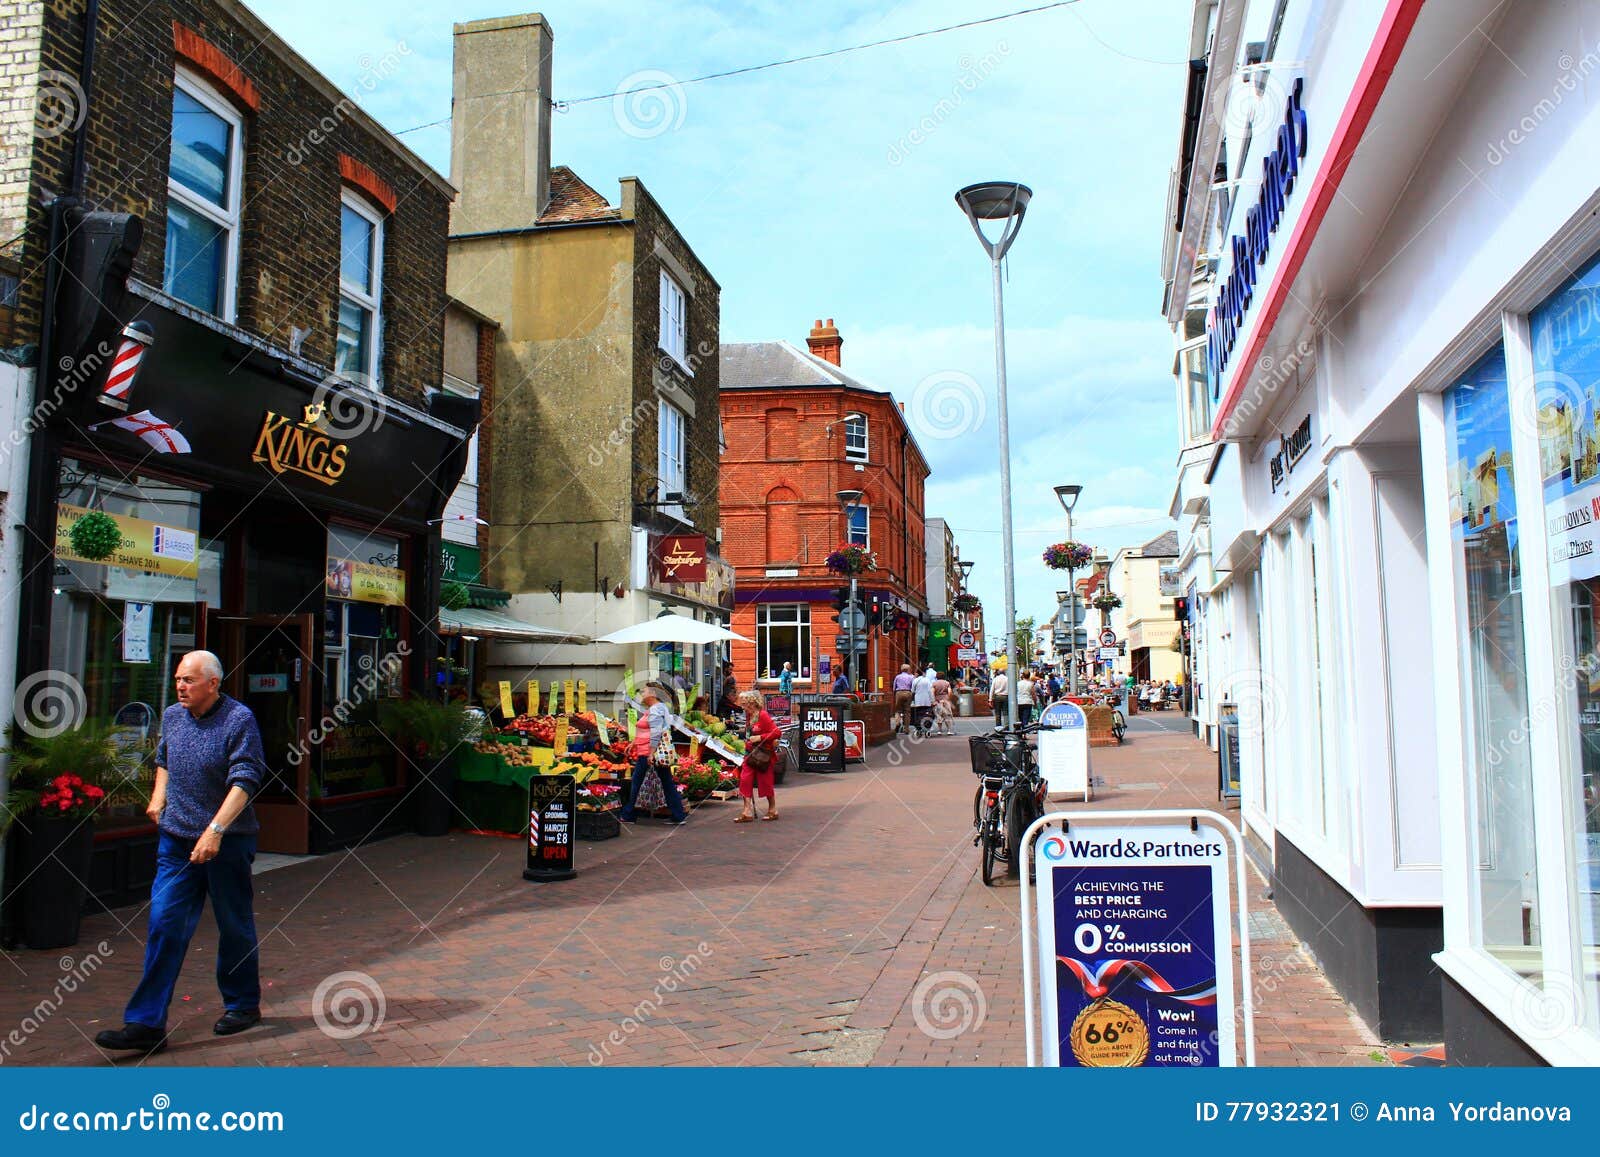 Deal Town High Street England Editorial Photo - Image of kent